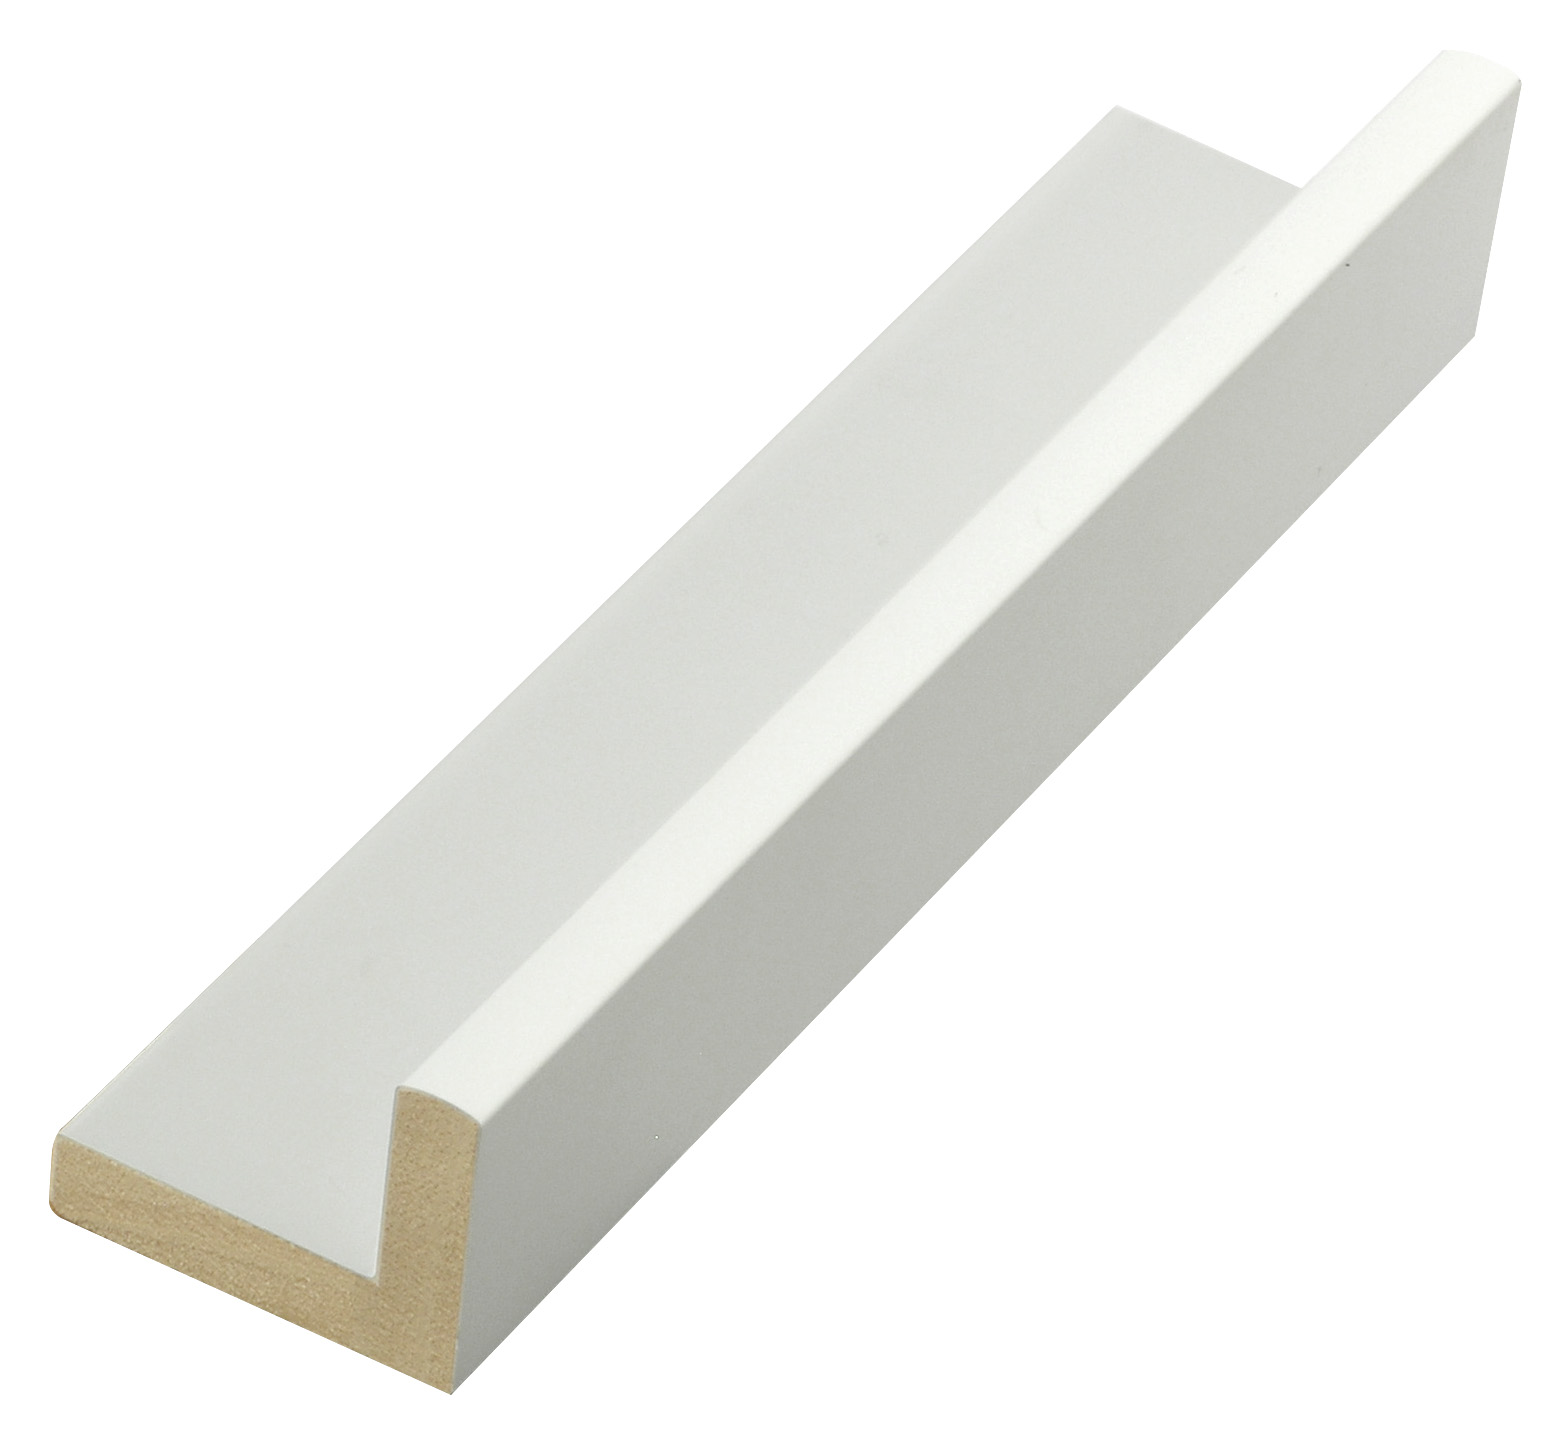 Moulding finger-jointed pine L shape, Larg.mm44 Height 34 White - 593BIANCO